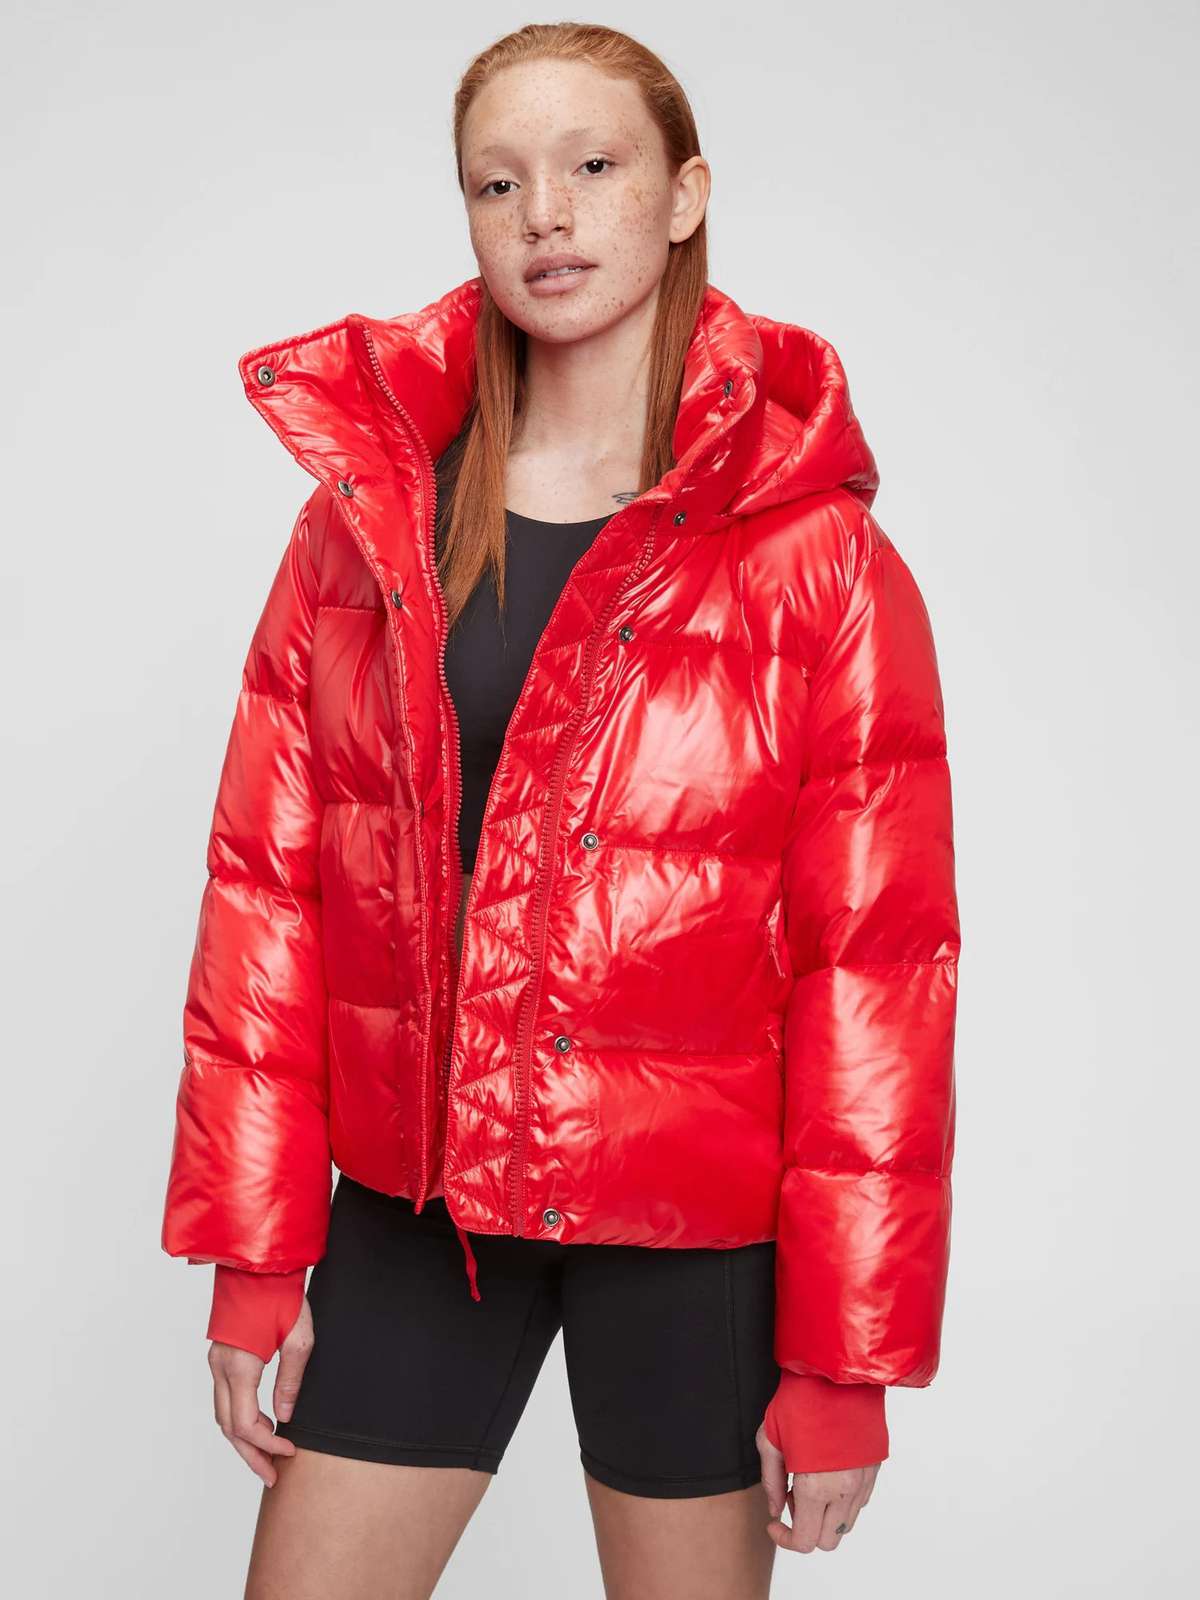 The Best Ways to Style Puffer Jacket Outfits